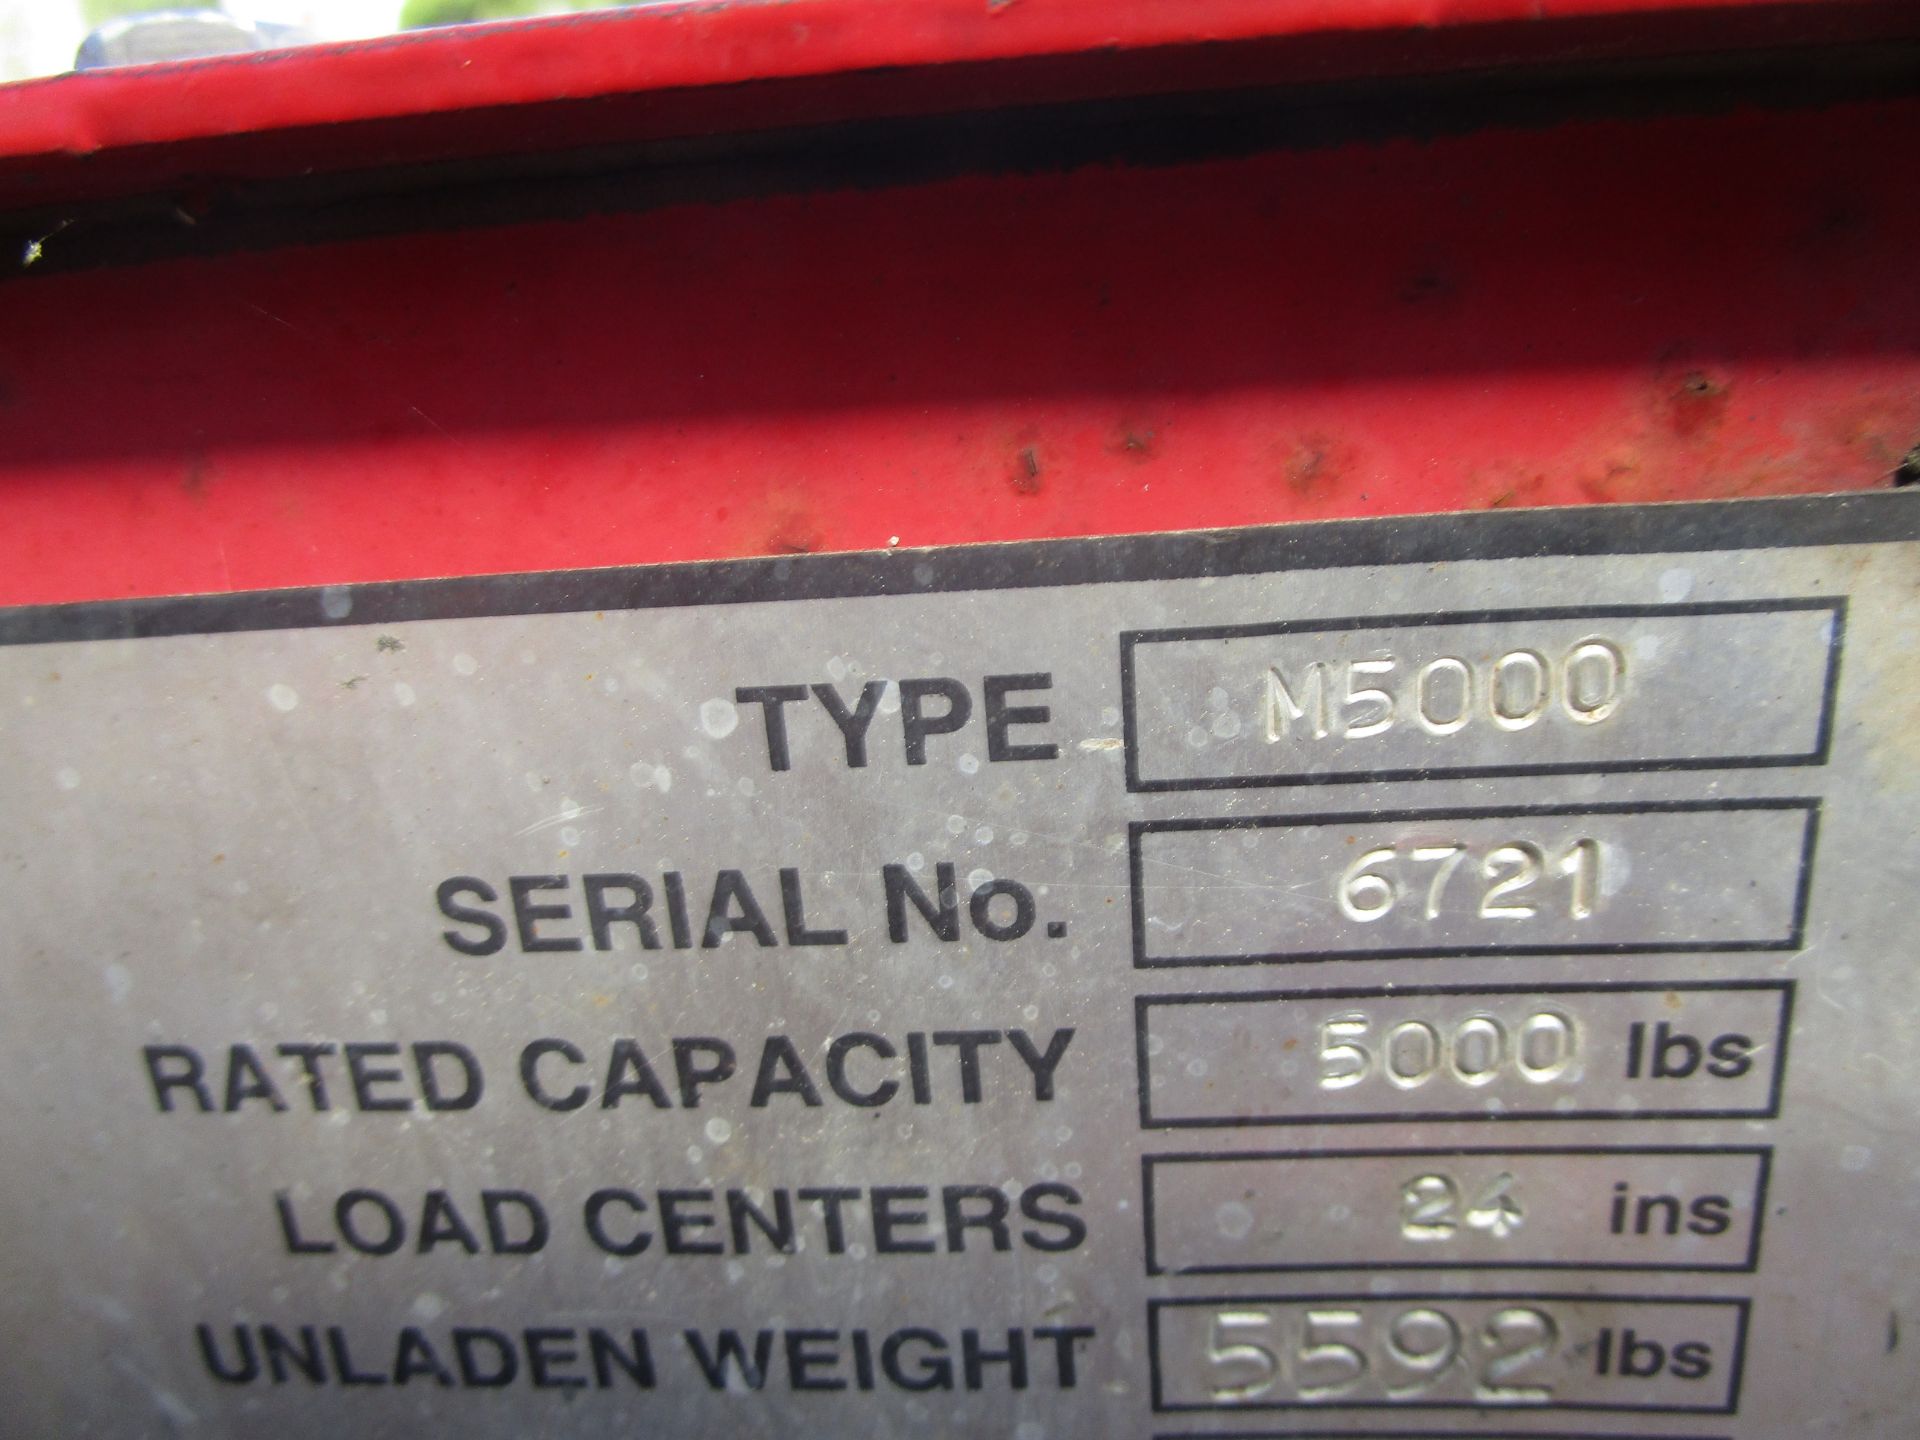 Moffett M5000 5,000lb Forklift - Located in Lester, PA - Image 8 of 8